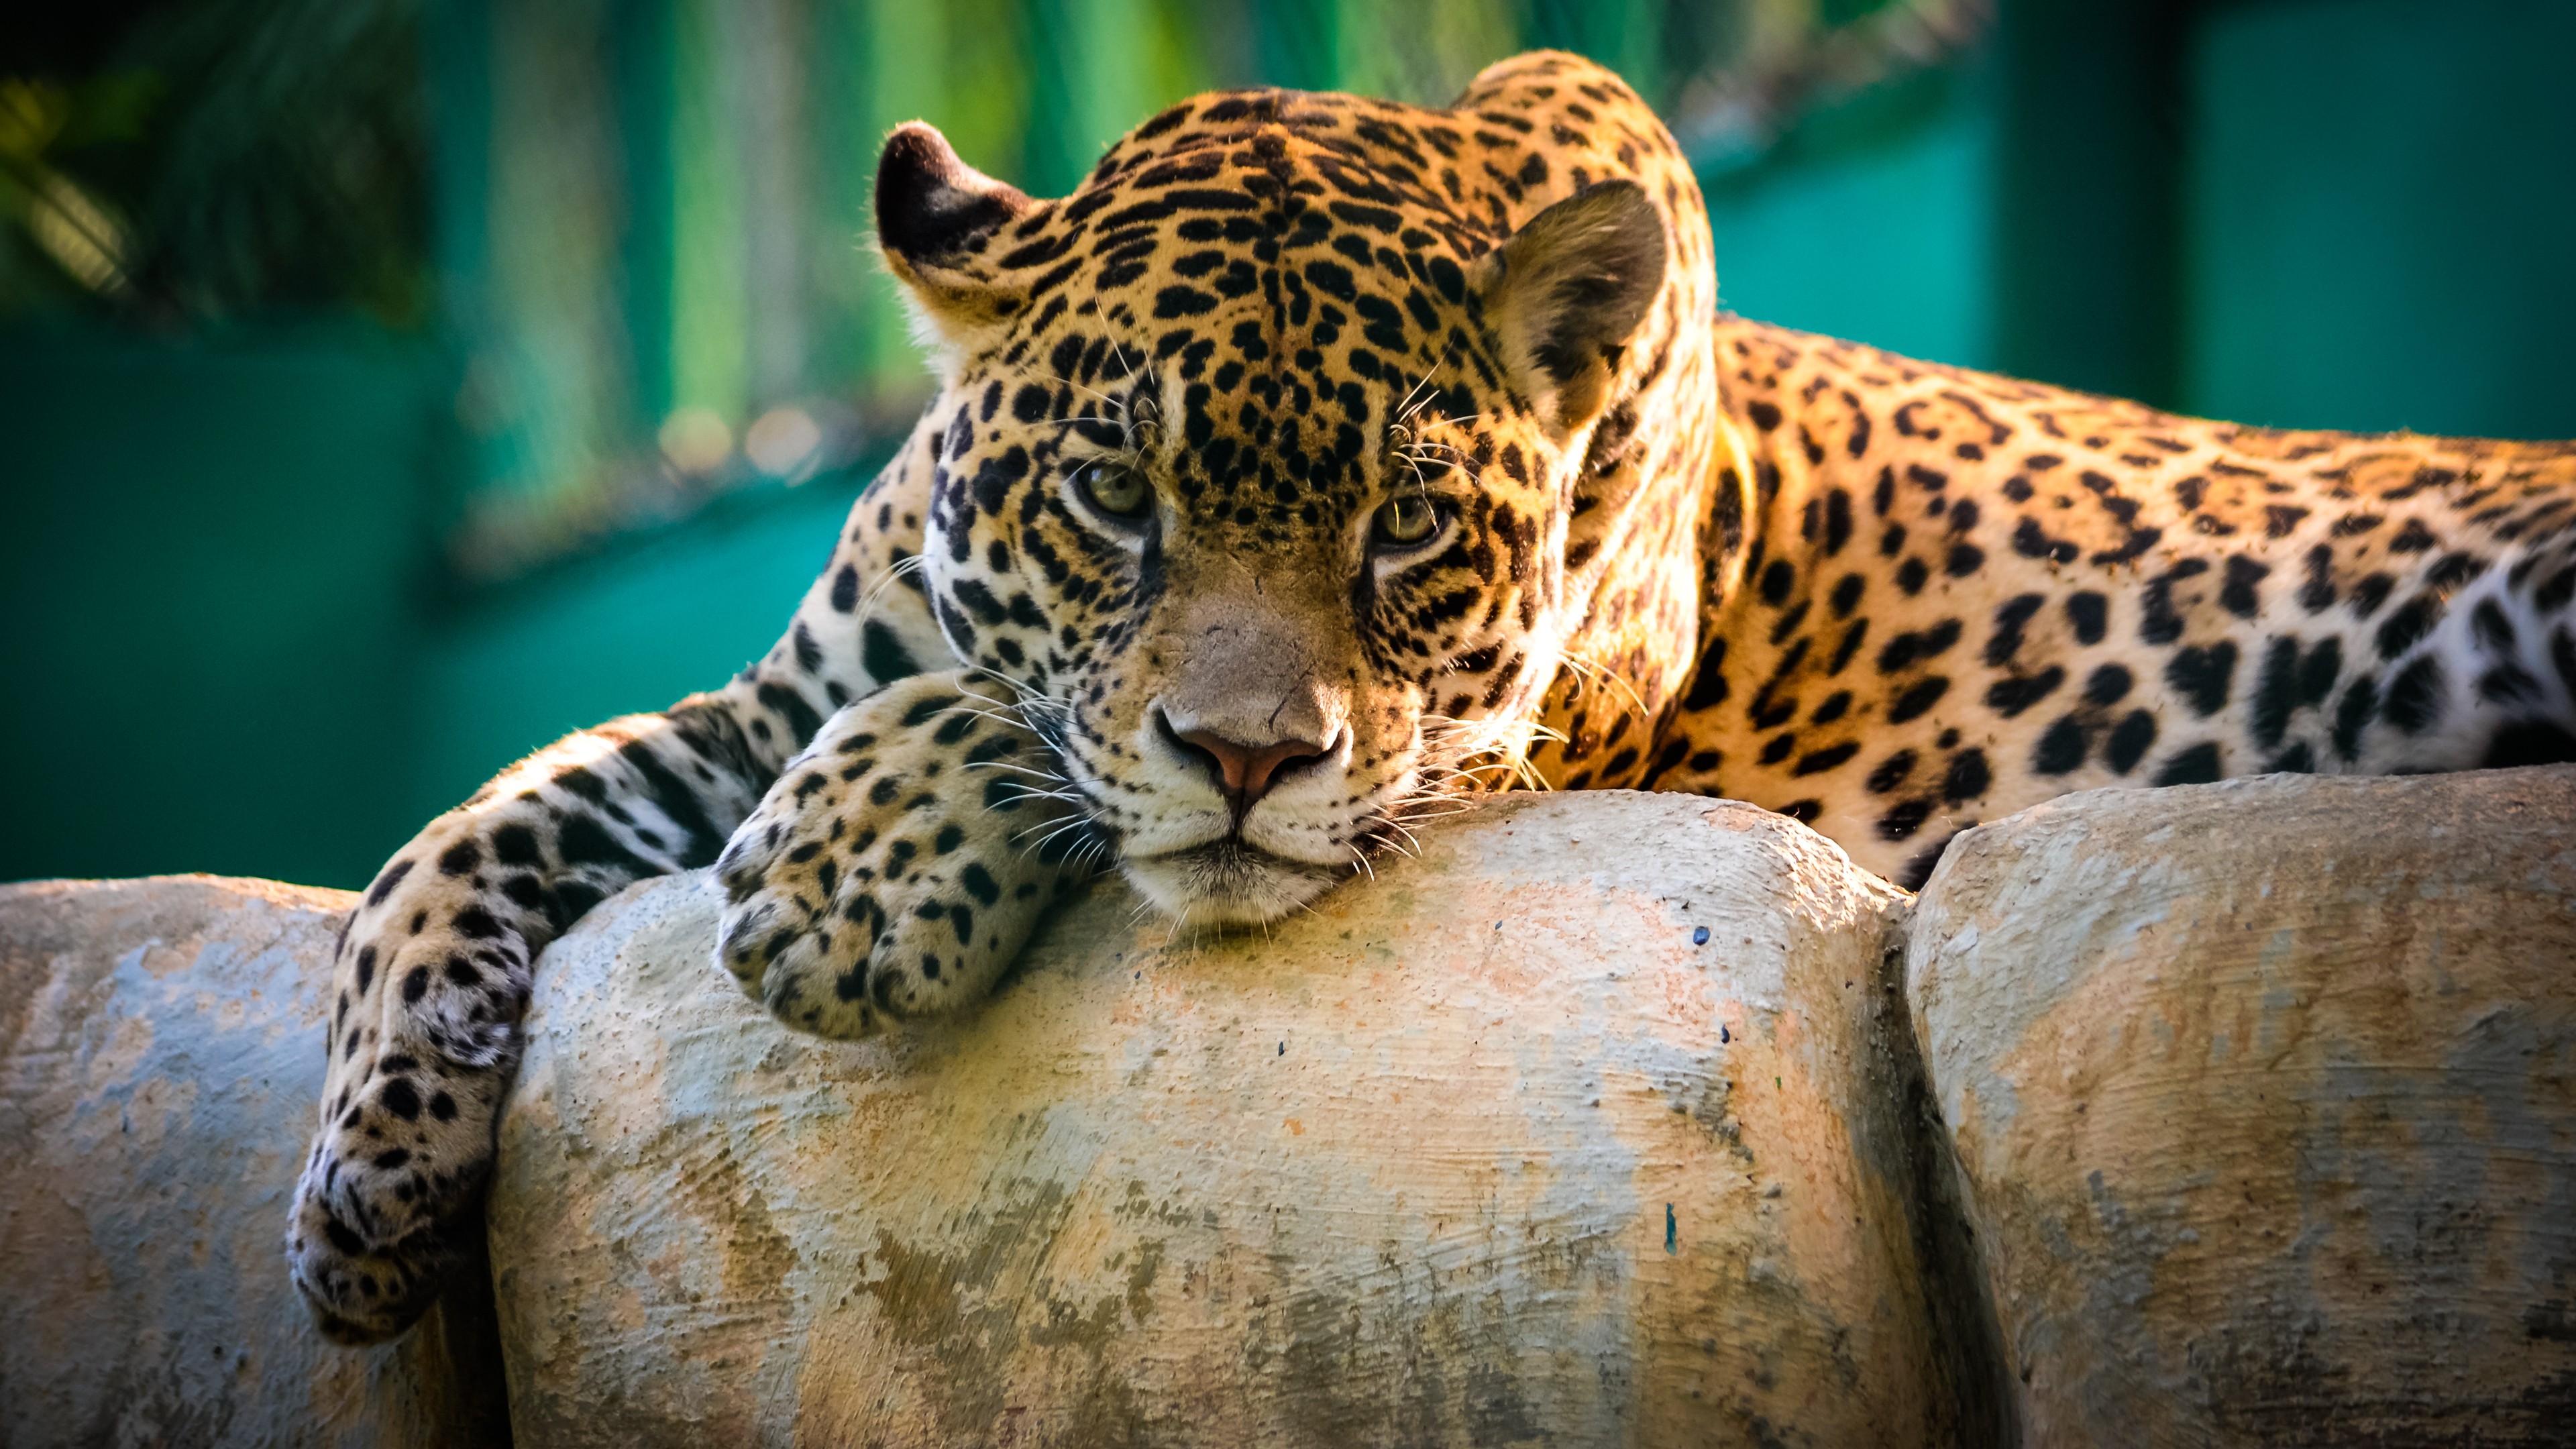 260+ Jaguar HD Wallpapers and Backgrounds